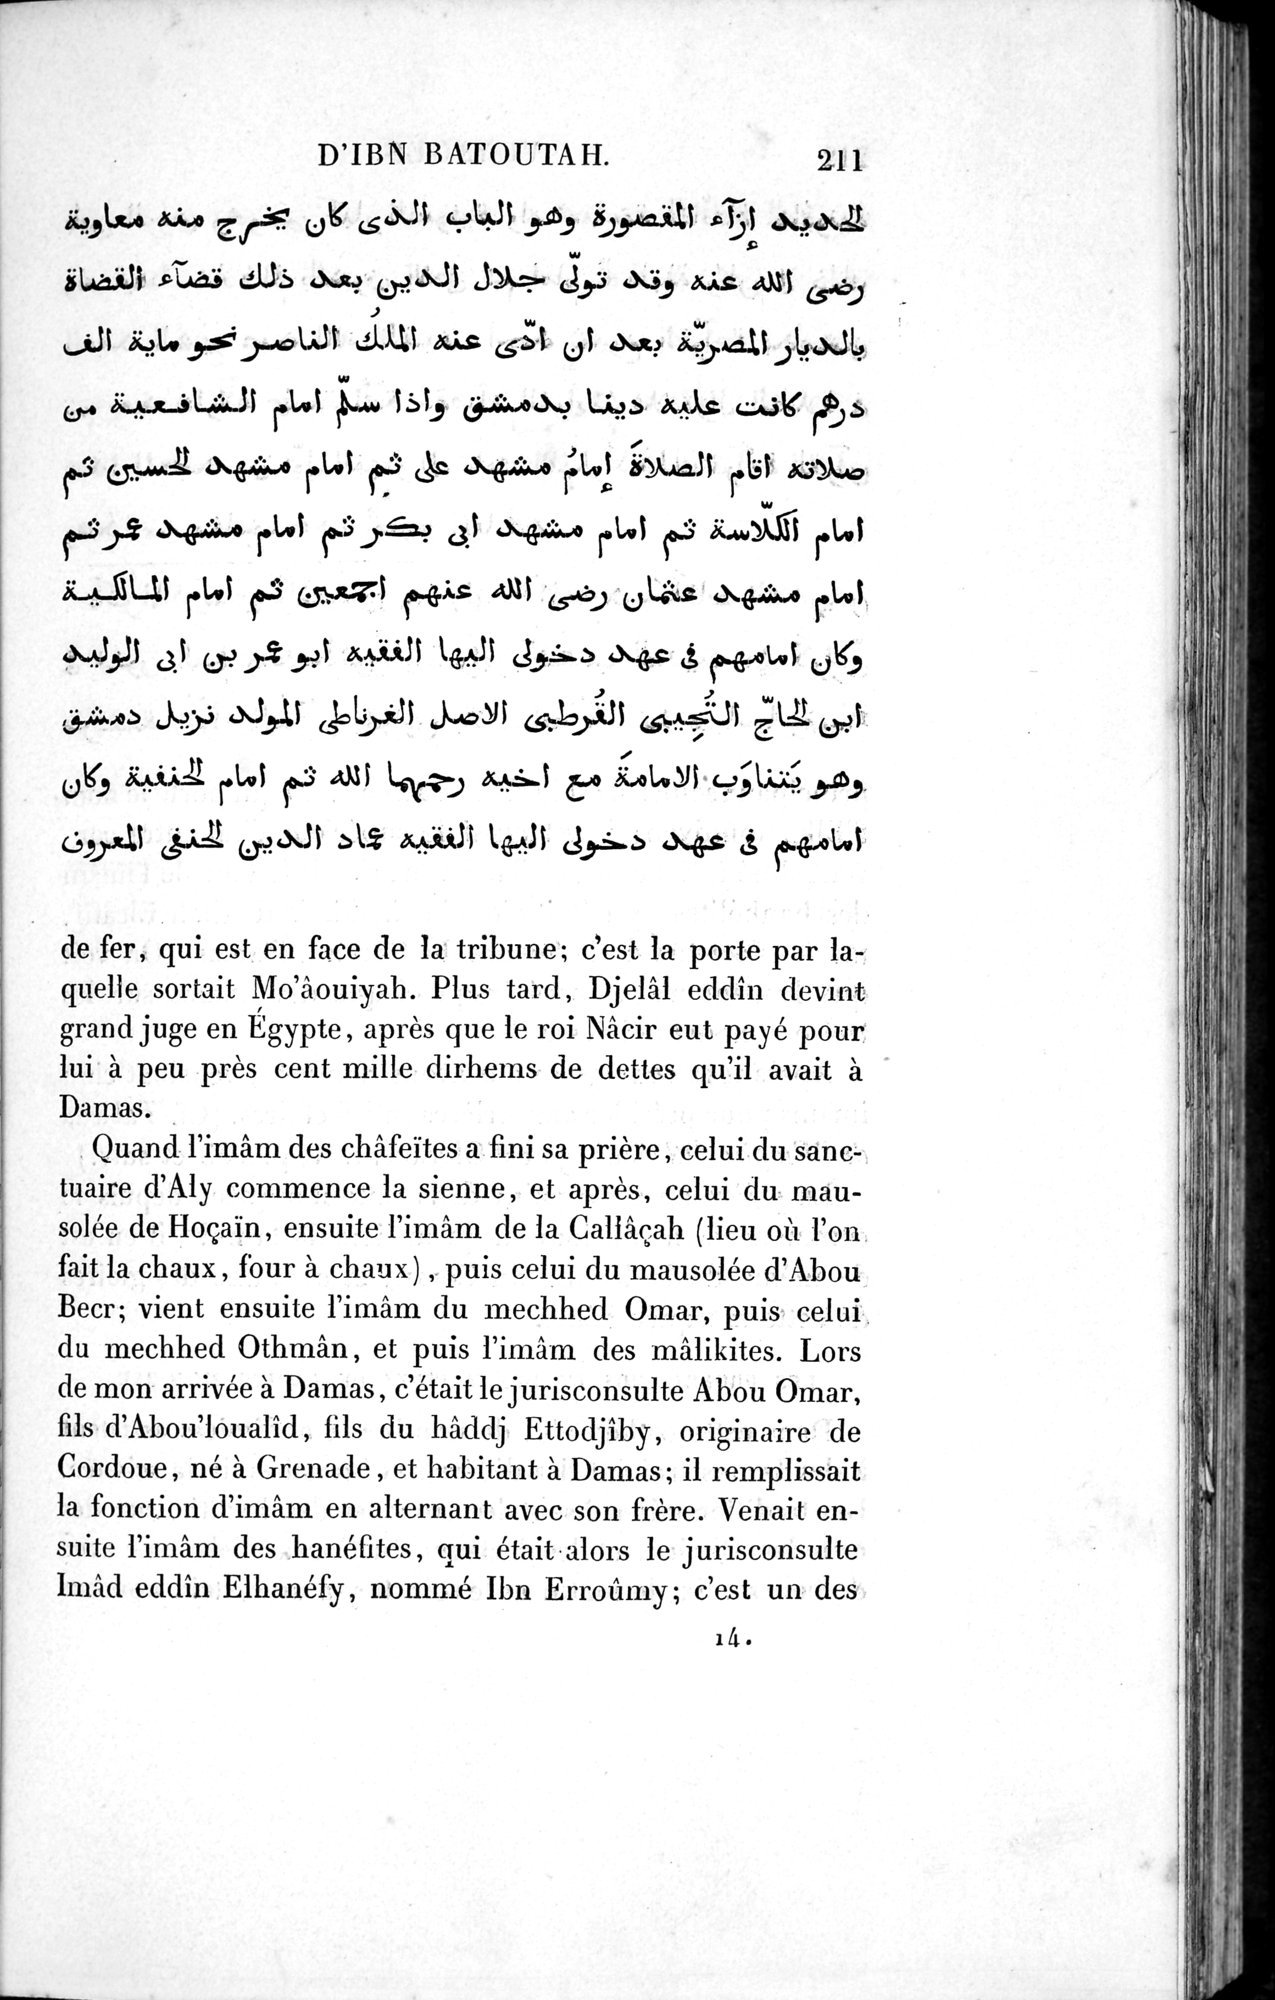 Voyages d'Ibn Batoutah : vol.1 / Page 271 (Grayscale High Resolution Image)